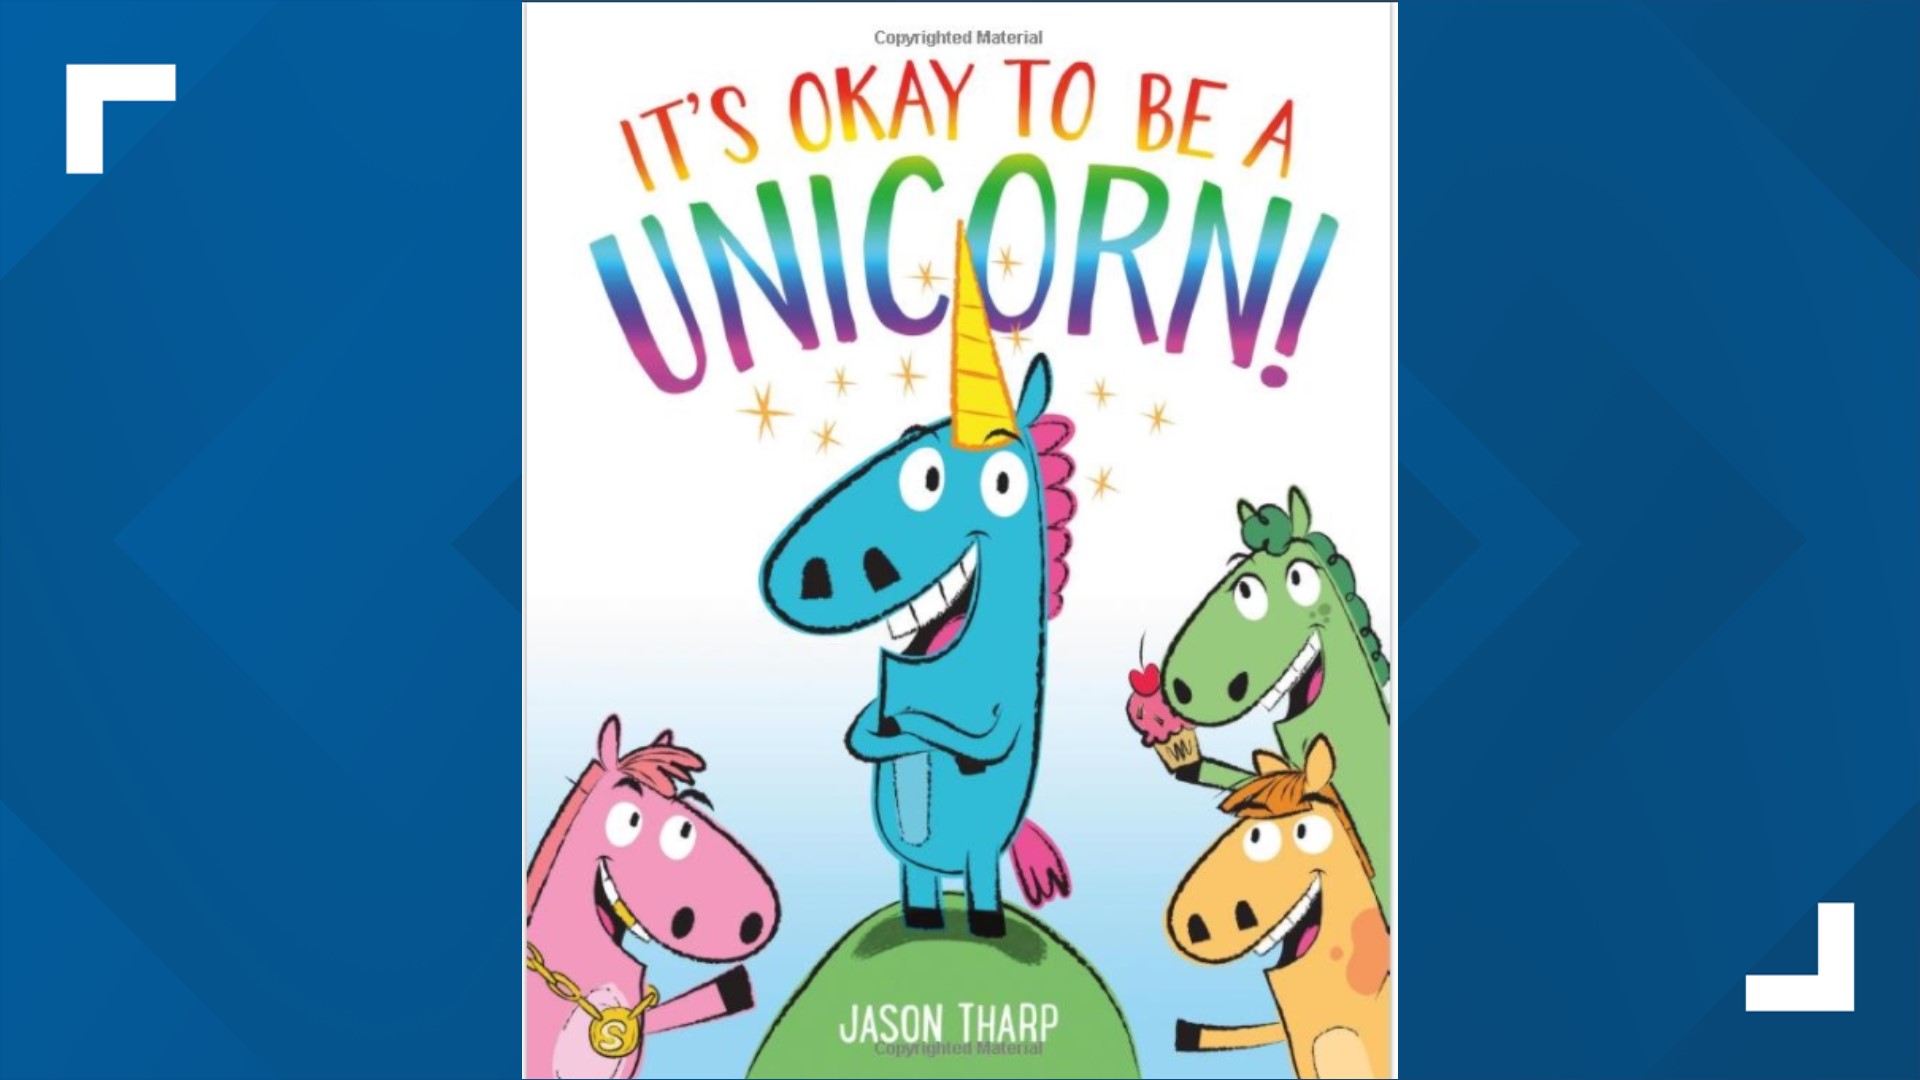 The author of the book “It’s Okay To Be a Unicorn” says he was told he could not read the book when he visited the district on Thursday.